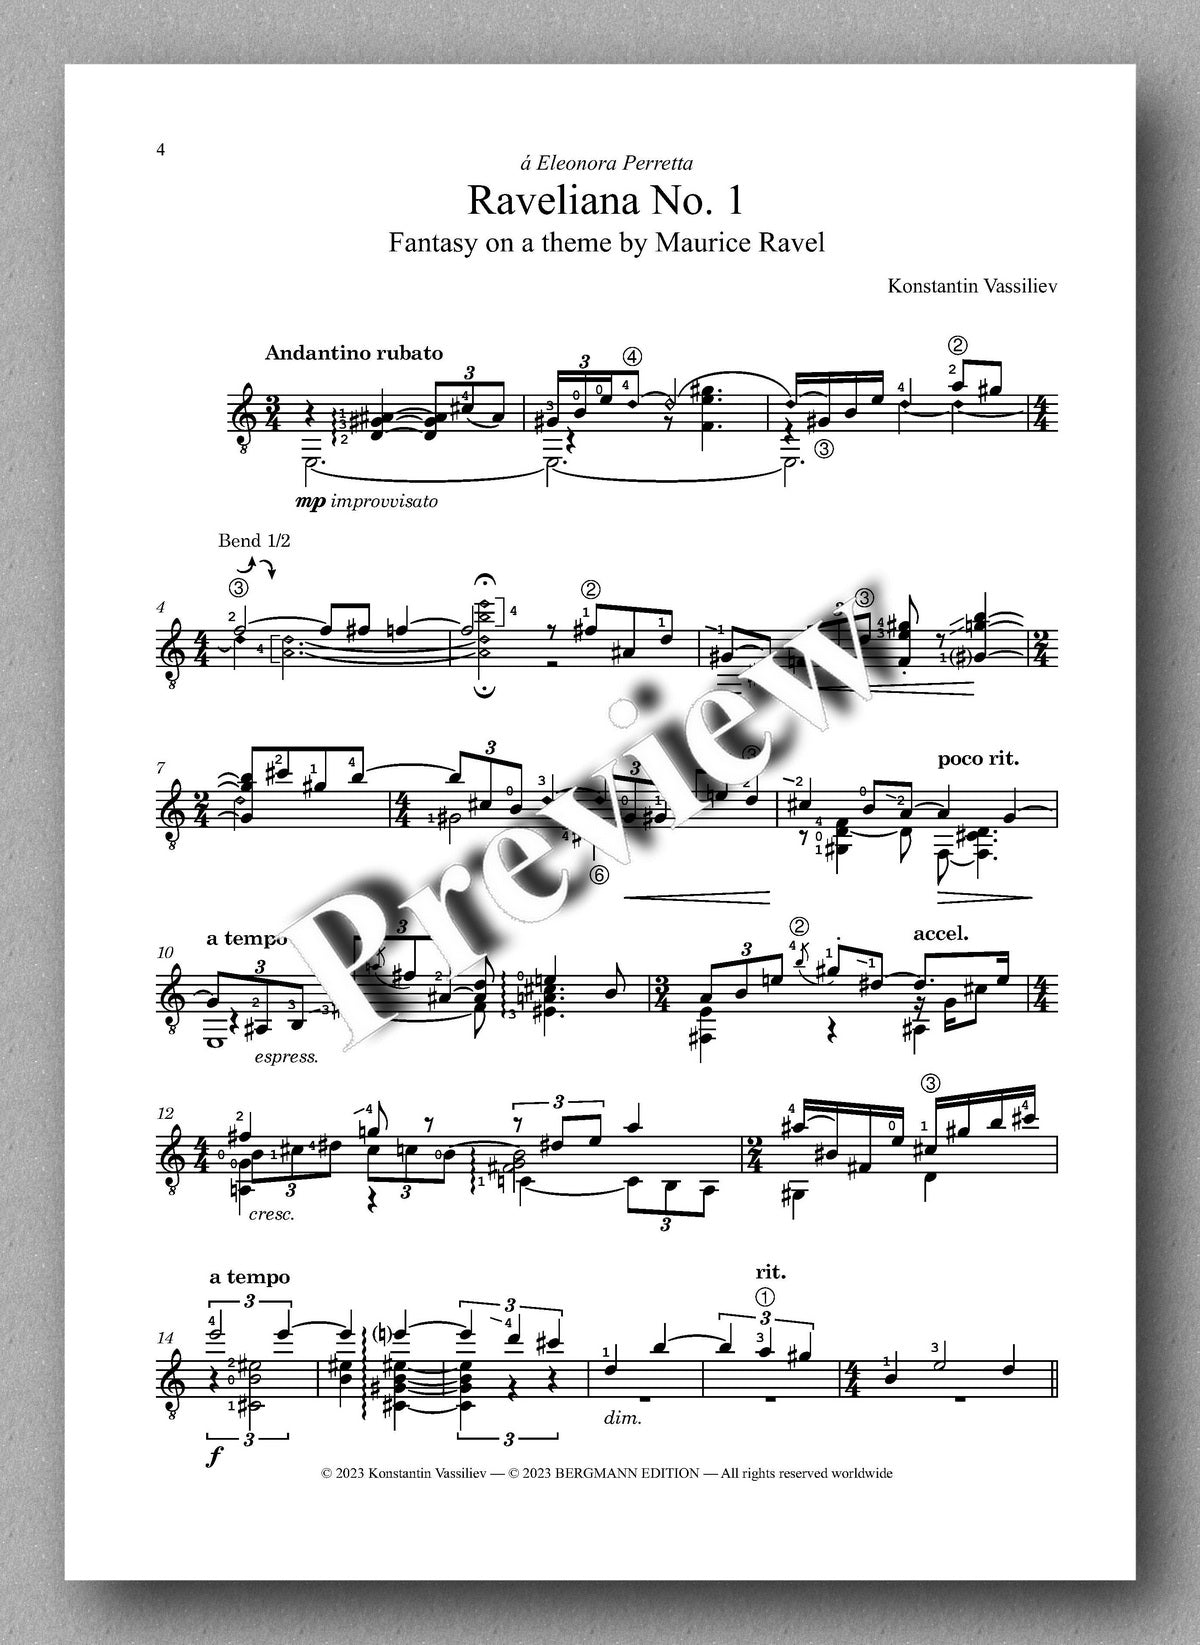 Raveliana No. 1 by Konstantin Vassiliev - preview of the music score 1